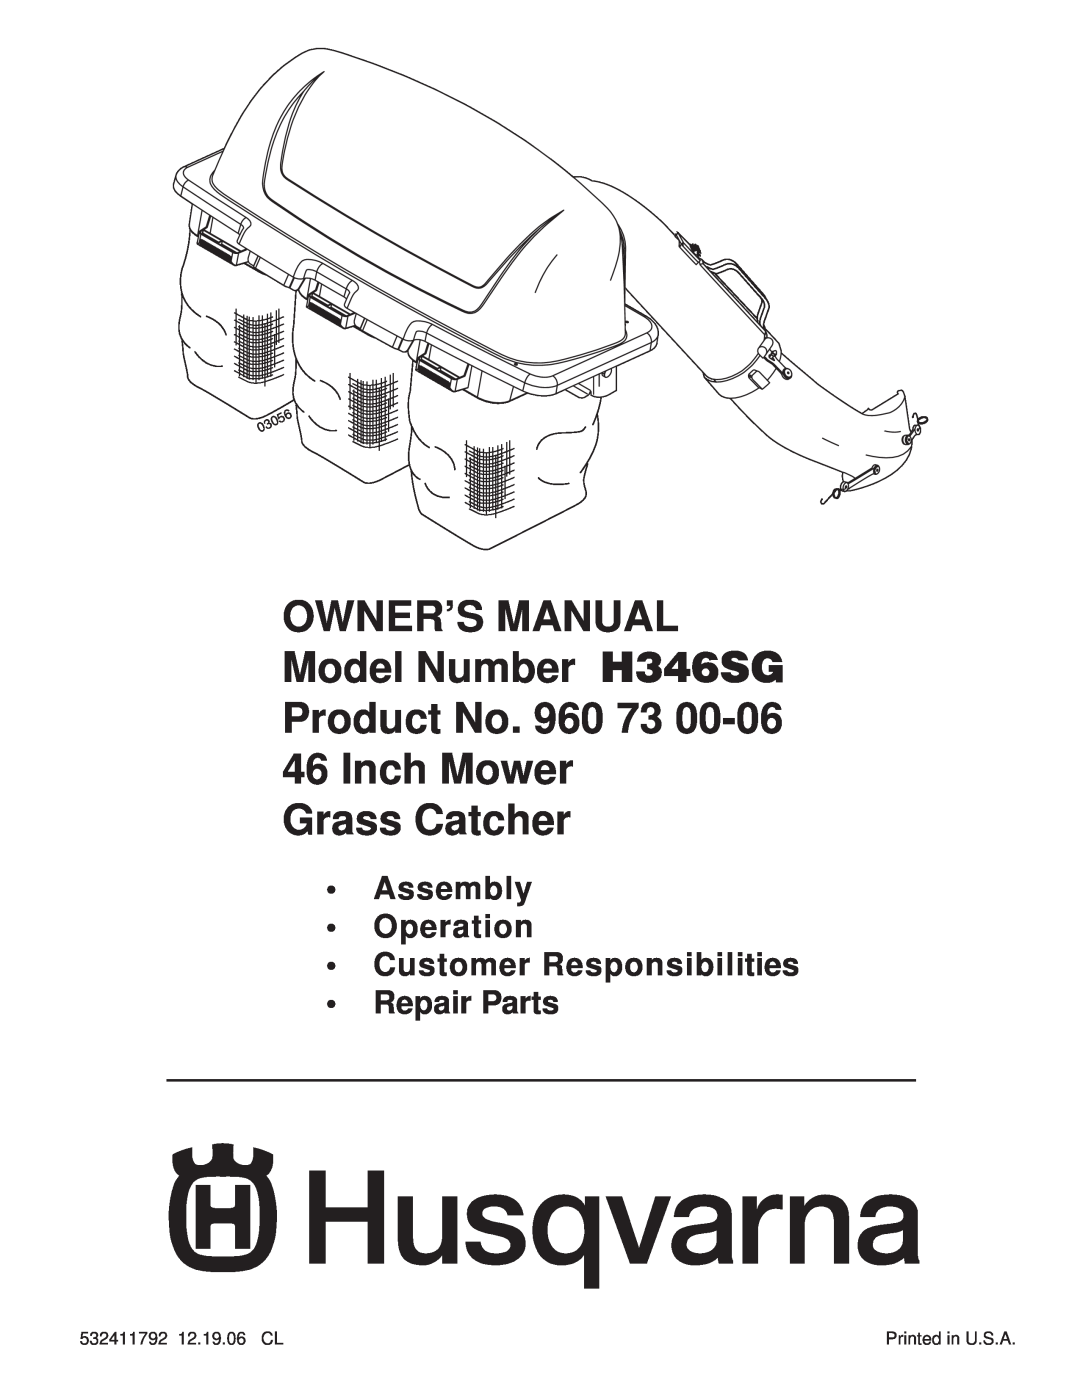 Husqvarna H346SG owner manual Grass Catcher, Assembly Operation Customer Responsibilities Repair Parts 